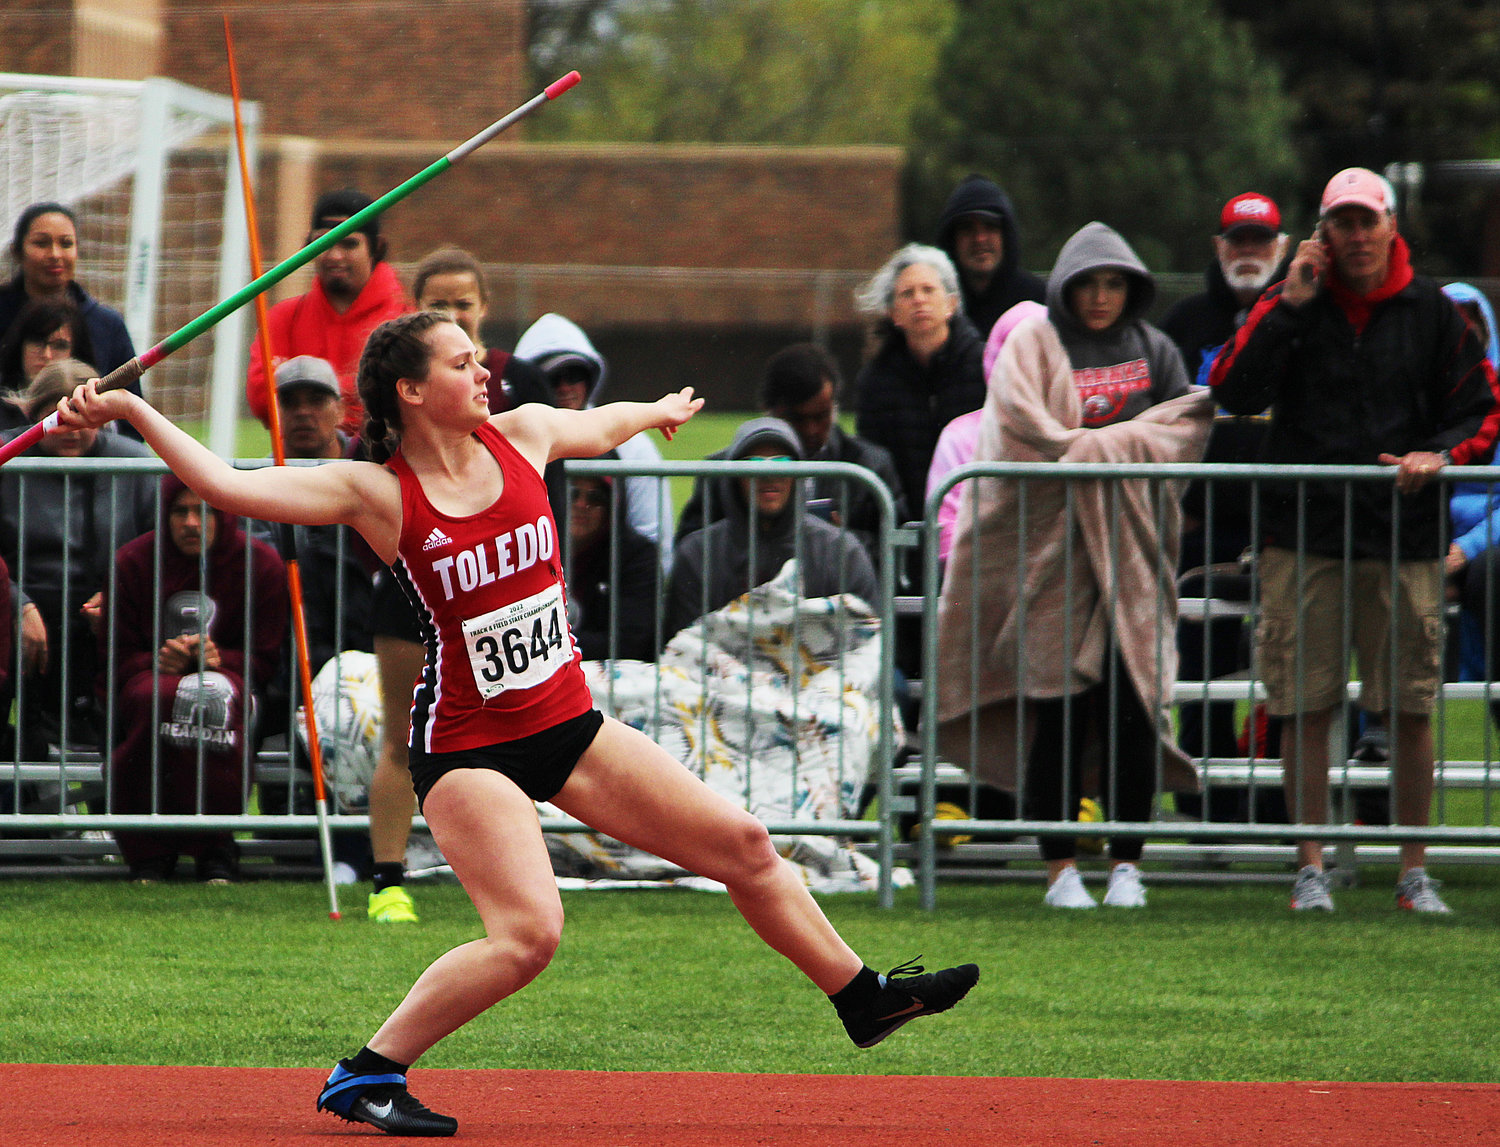 Toledo's Lyndzie Filla plants her foot for a javelin throw during the State 1B/2B/1A Track and Field Championships in Cheney, Washington on May 27, 2022.